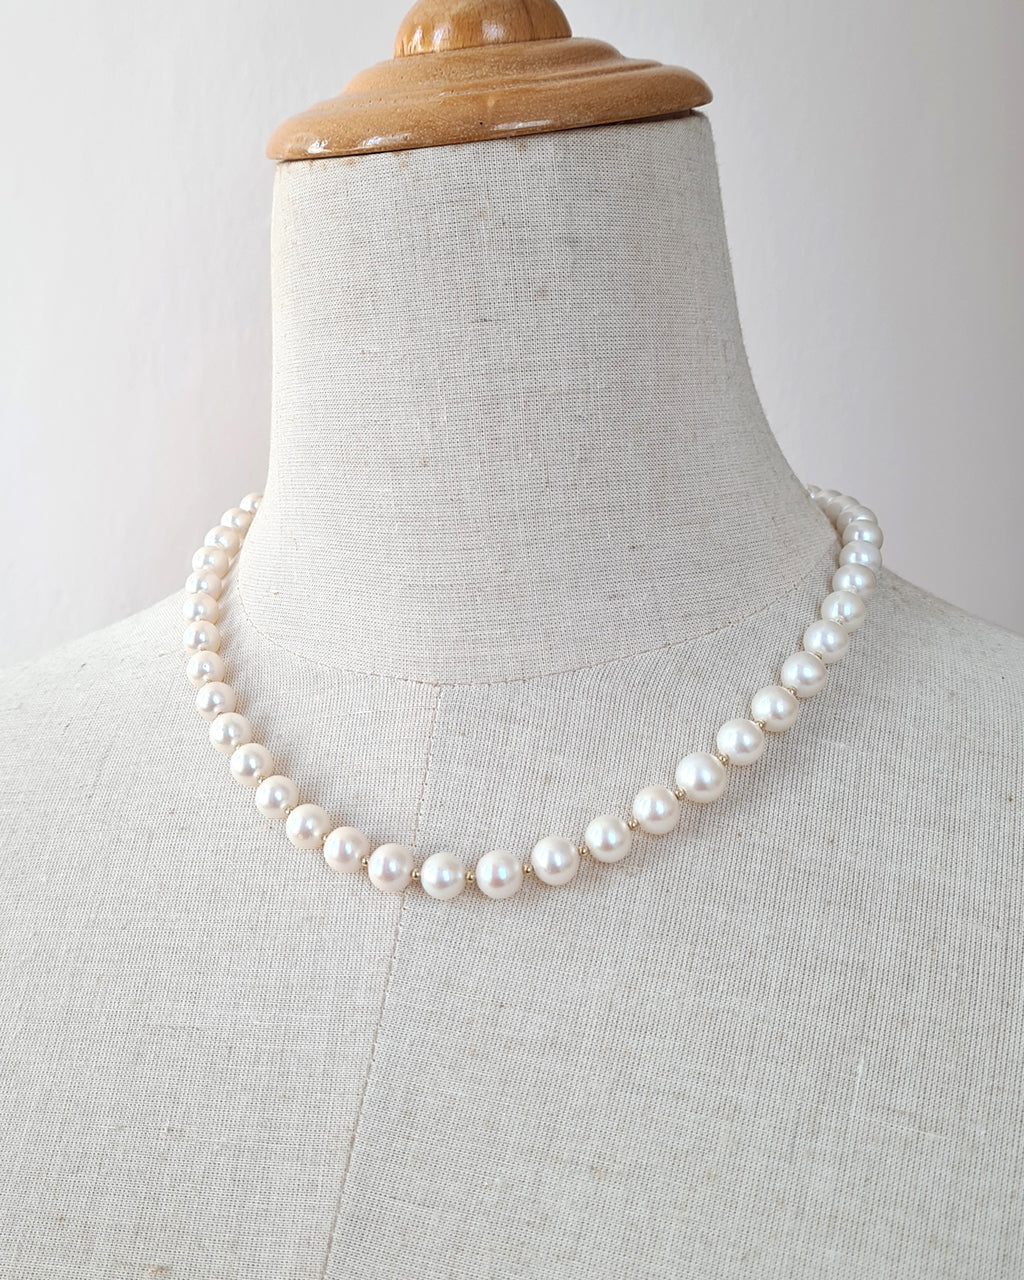 Elegant White Pearl Necklace | The Perfect Gift for Mothers & Brides 16 inch / with Standard Gift Box